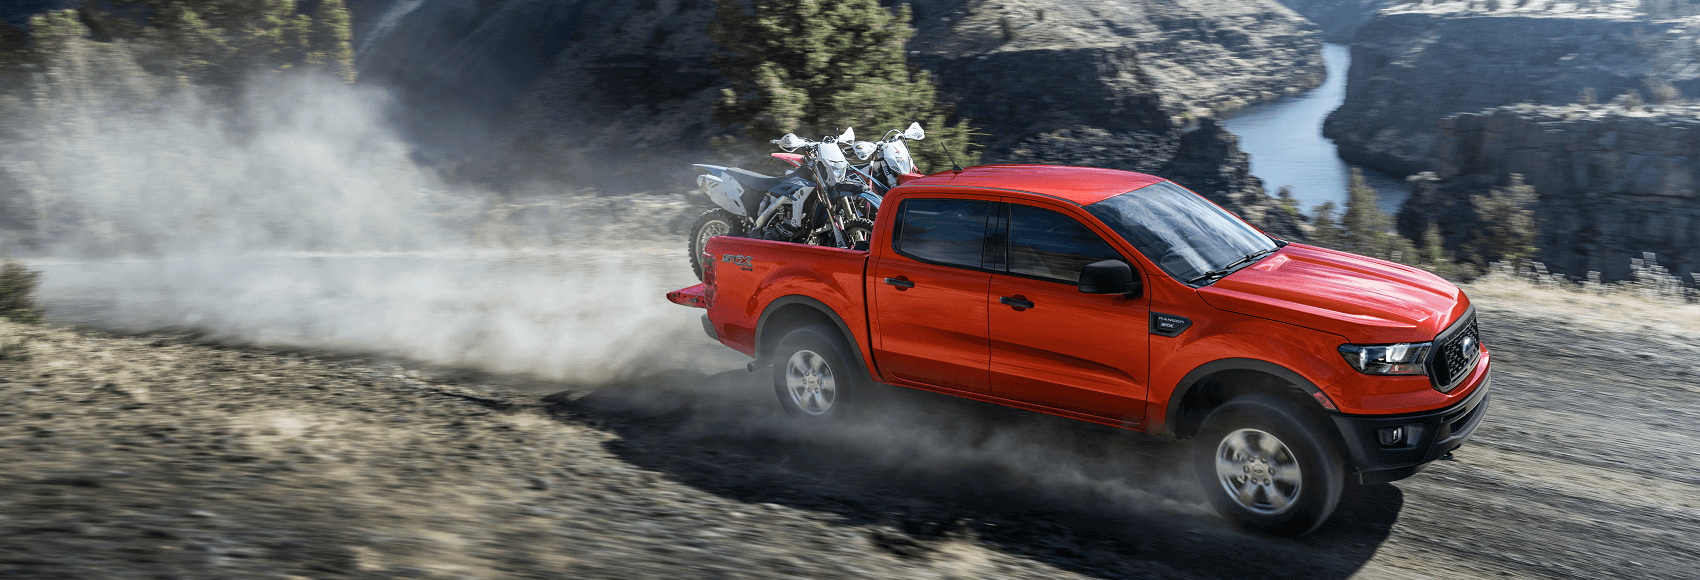 Red Ford Ranger's payload capacity allows it to carry several motorbikes in the bed